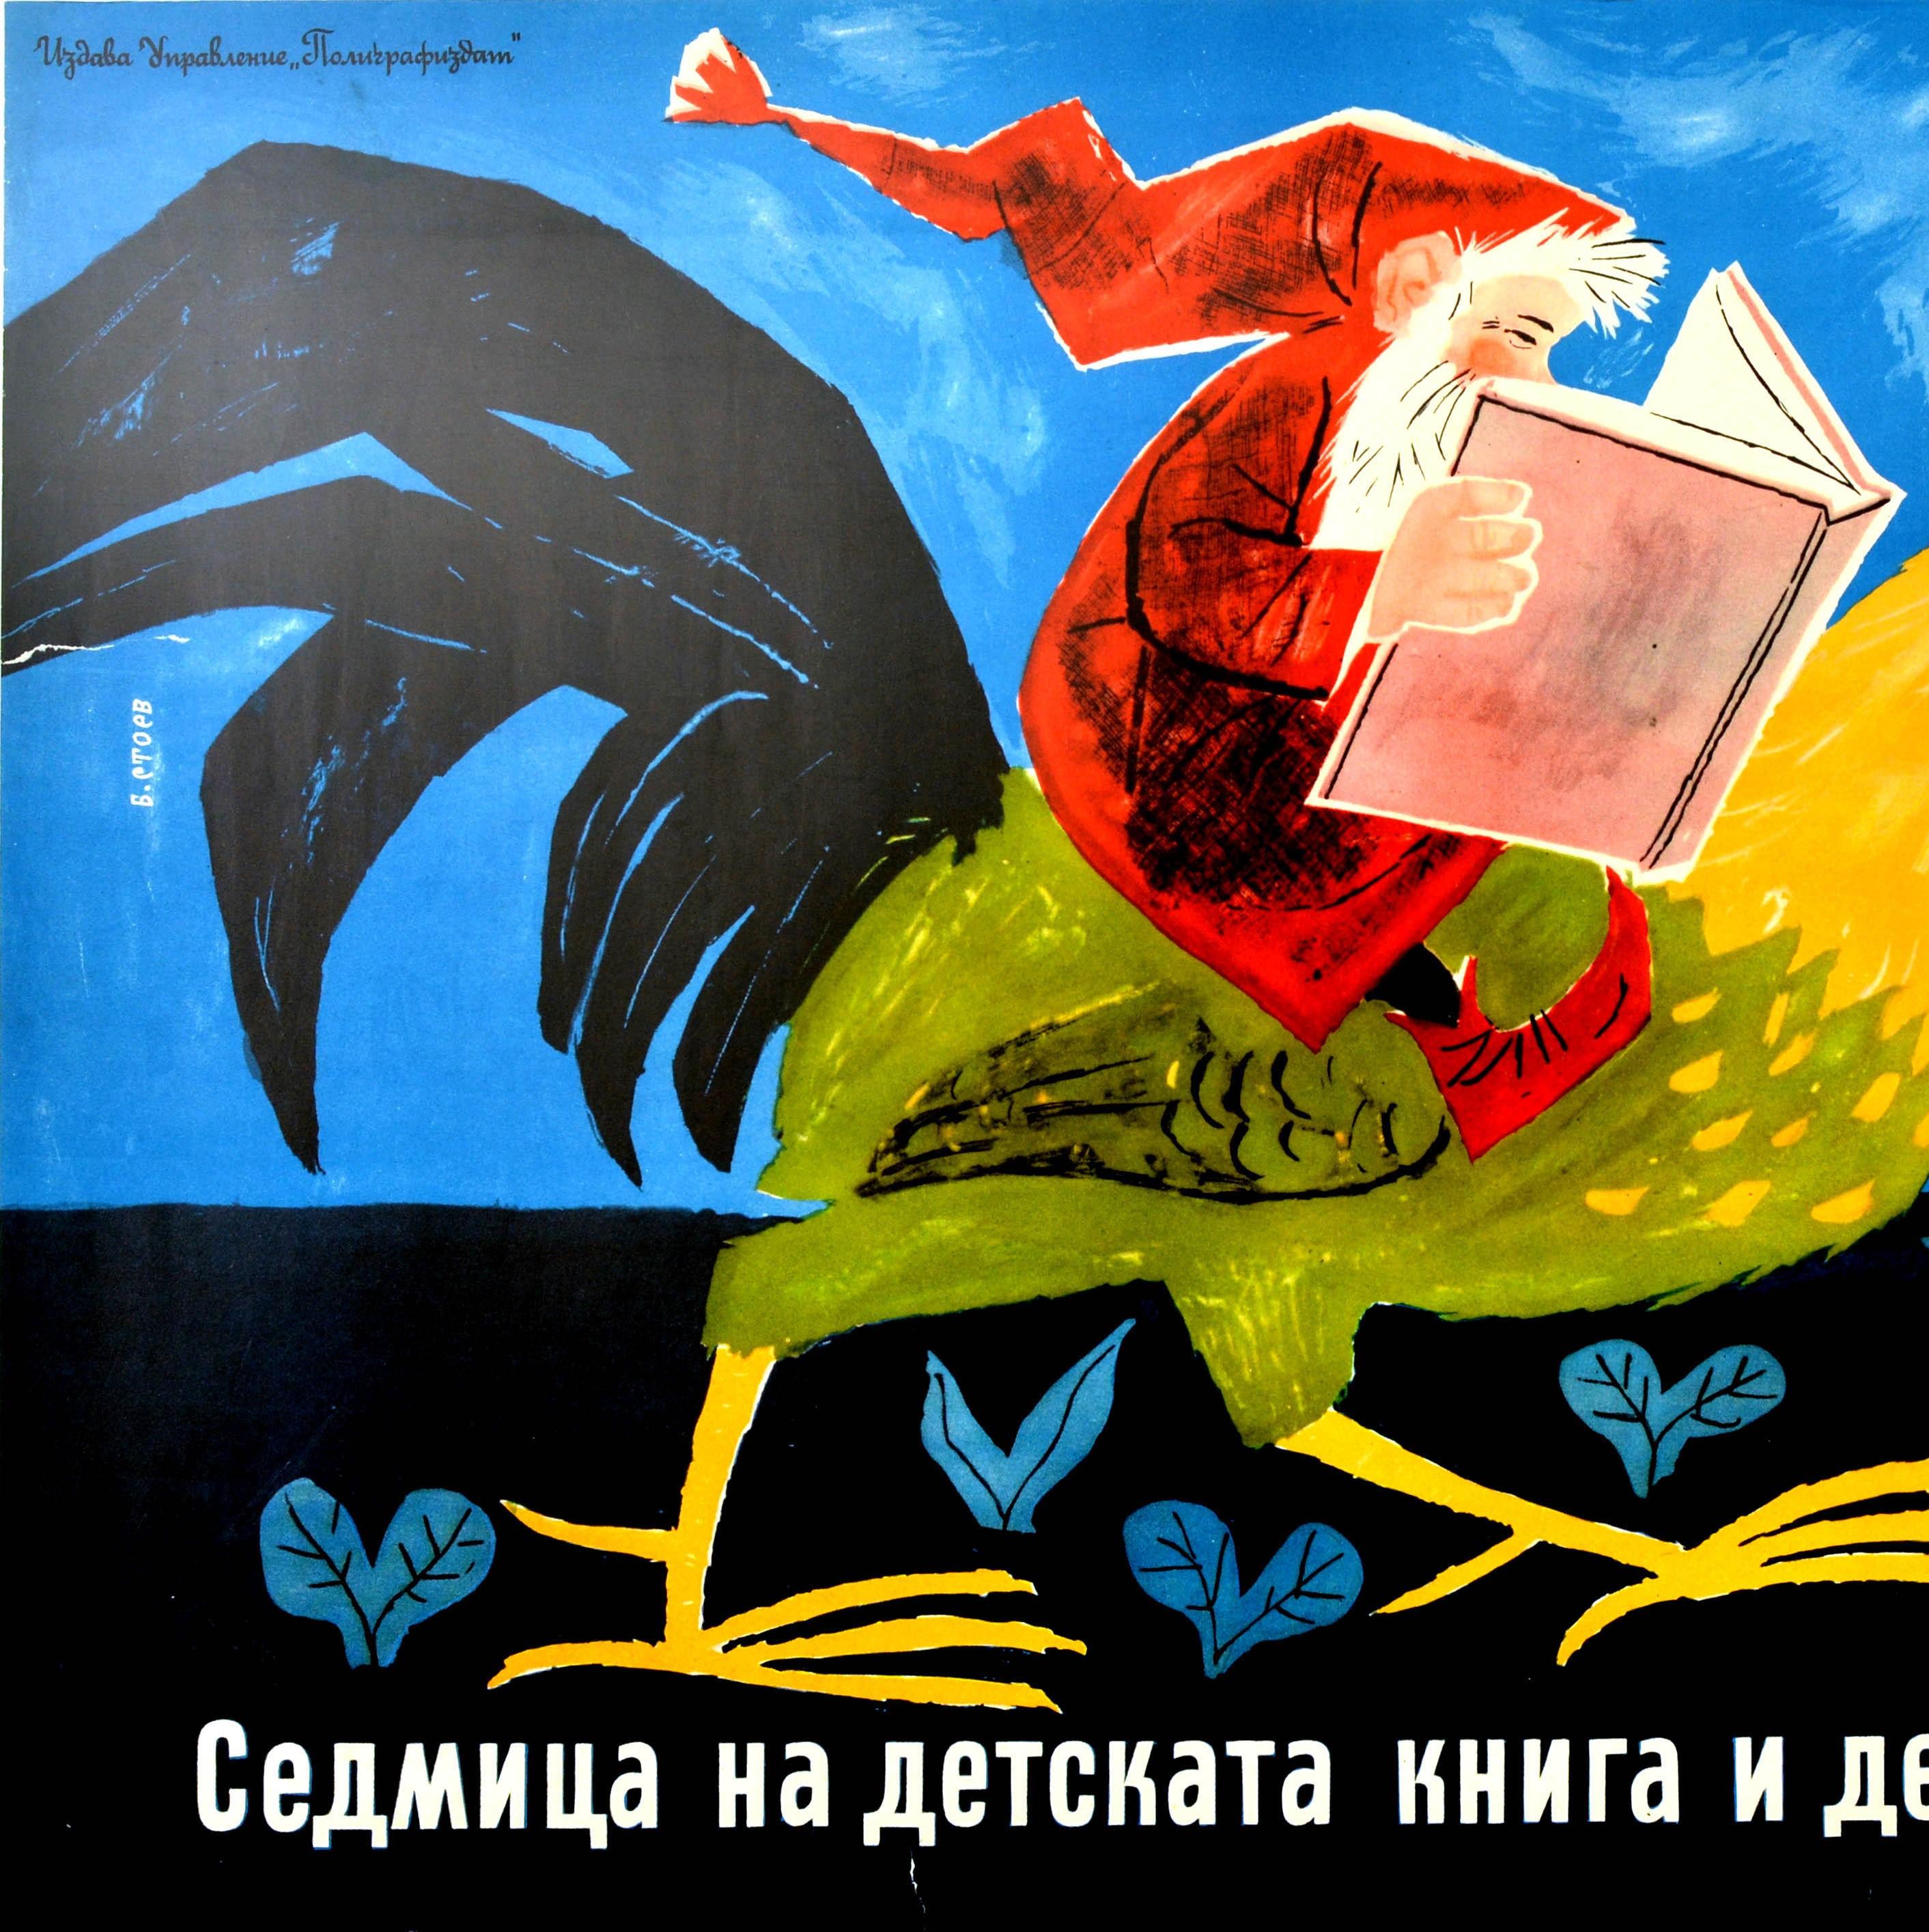 Original vintage advertising poster for the Week of Children's Books and Children's Songs held from 16-23 April 1961 in Bulgaria featuring fun and colorful cartoon artwork of an old man wearing a long red pointed hat and pointed shoes reading a book